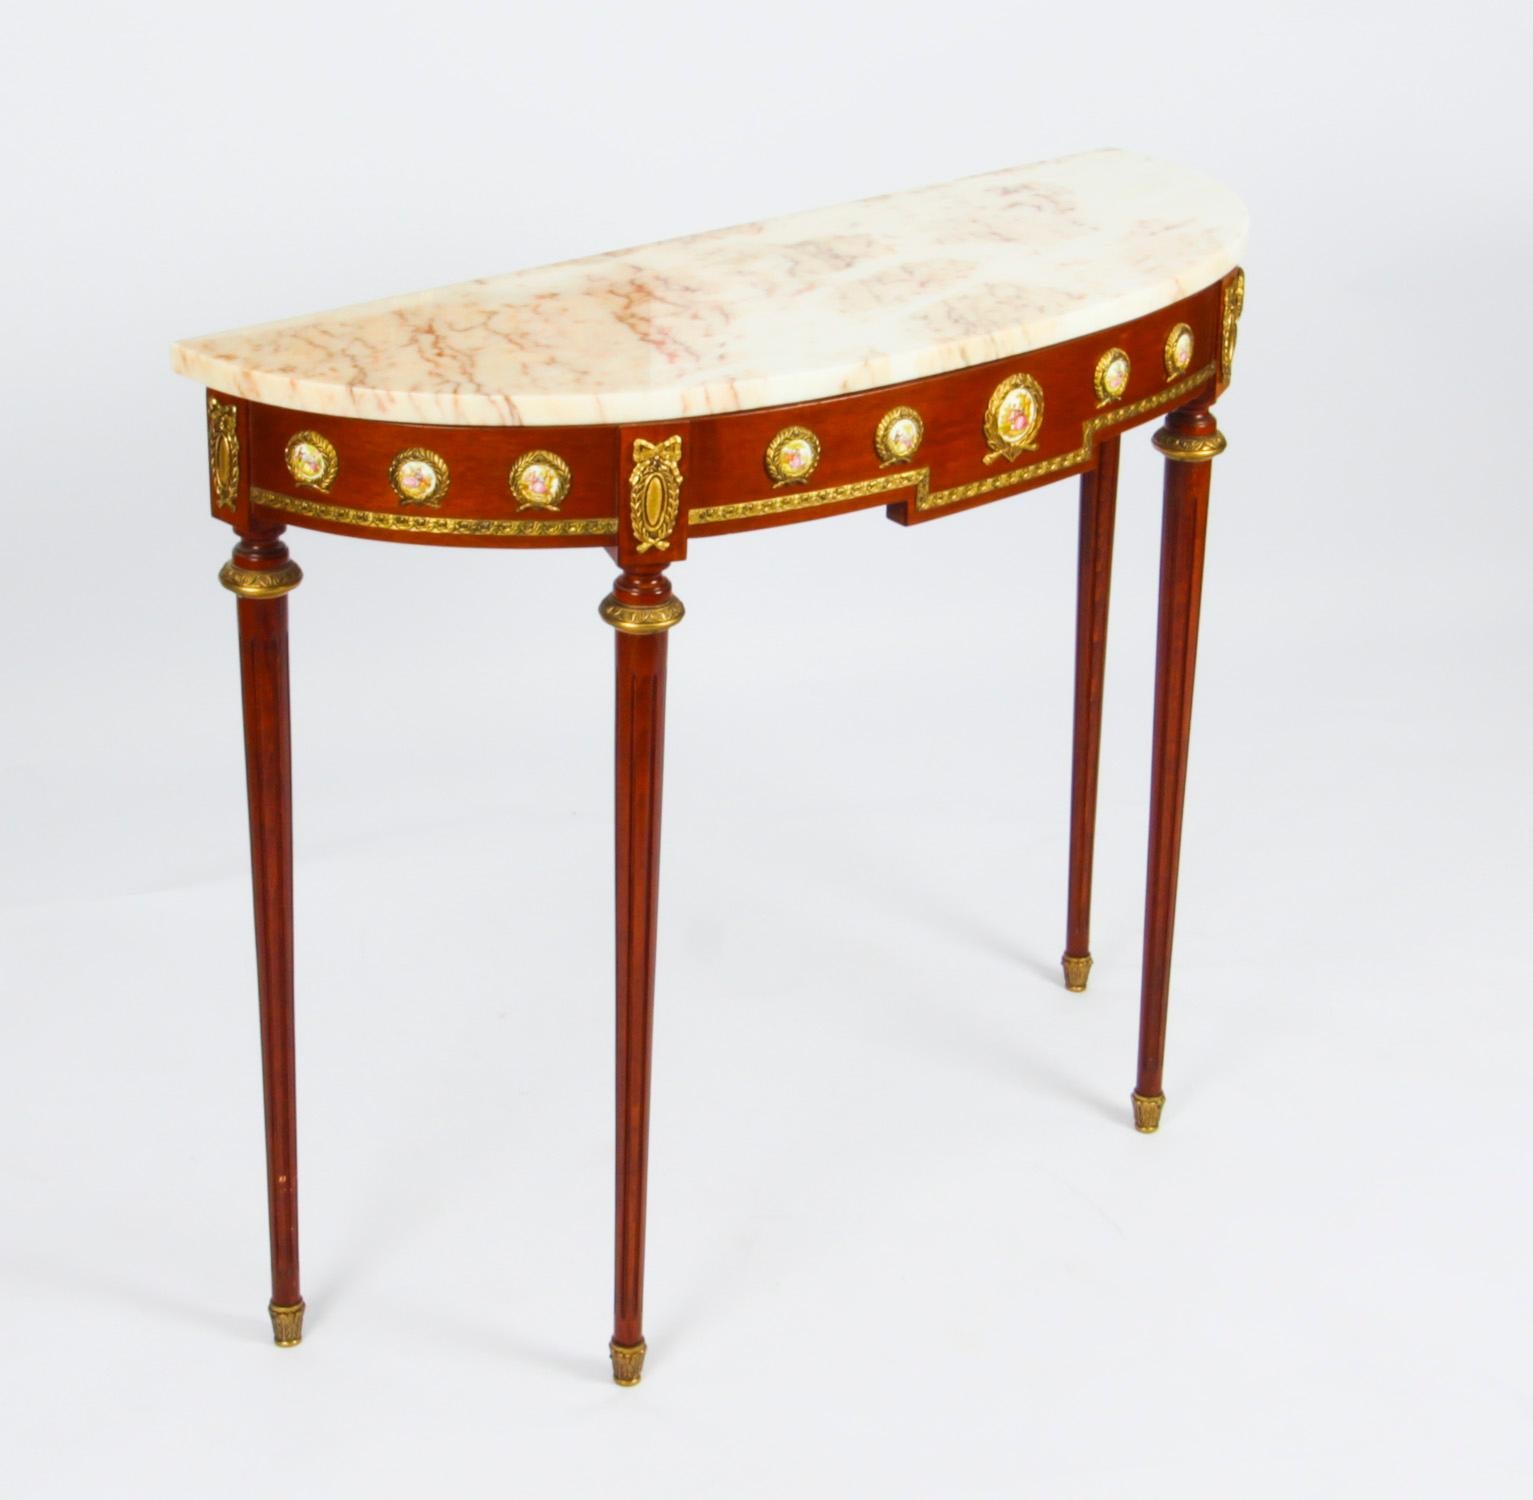 This is an elegant Louis Revival console table and mirror by the renowned cabinet maker H & L Epstein, dating from mid 20th century.

These magnificent pieces are crafted from wood with stunnning ormolu mounts and the console features ten Sevres